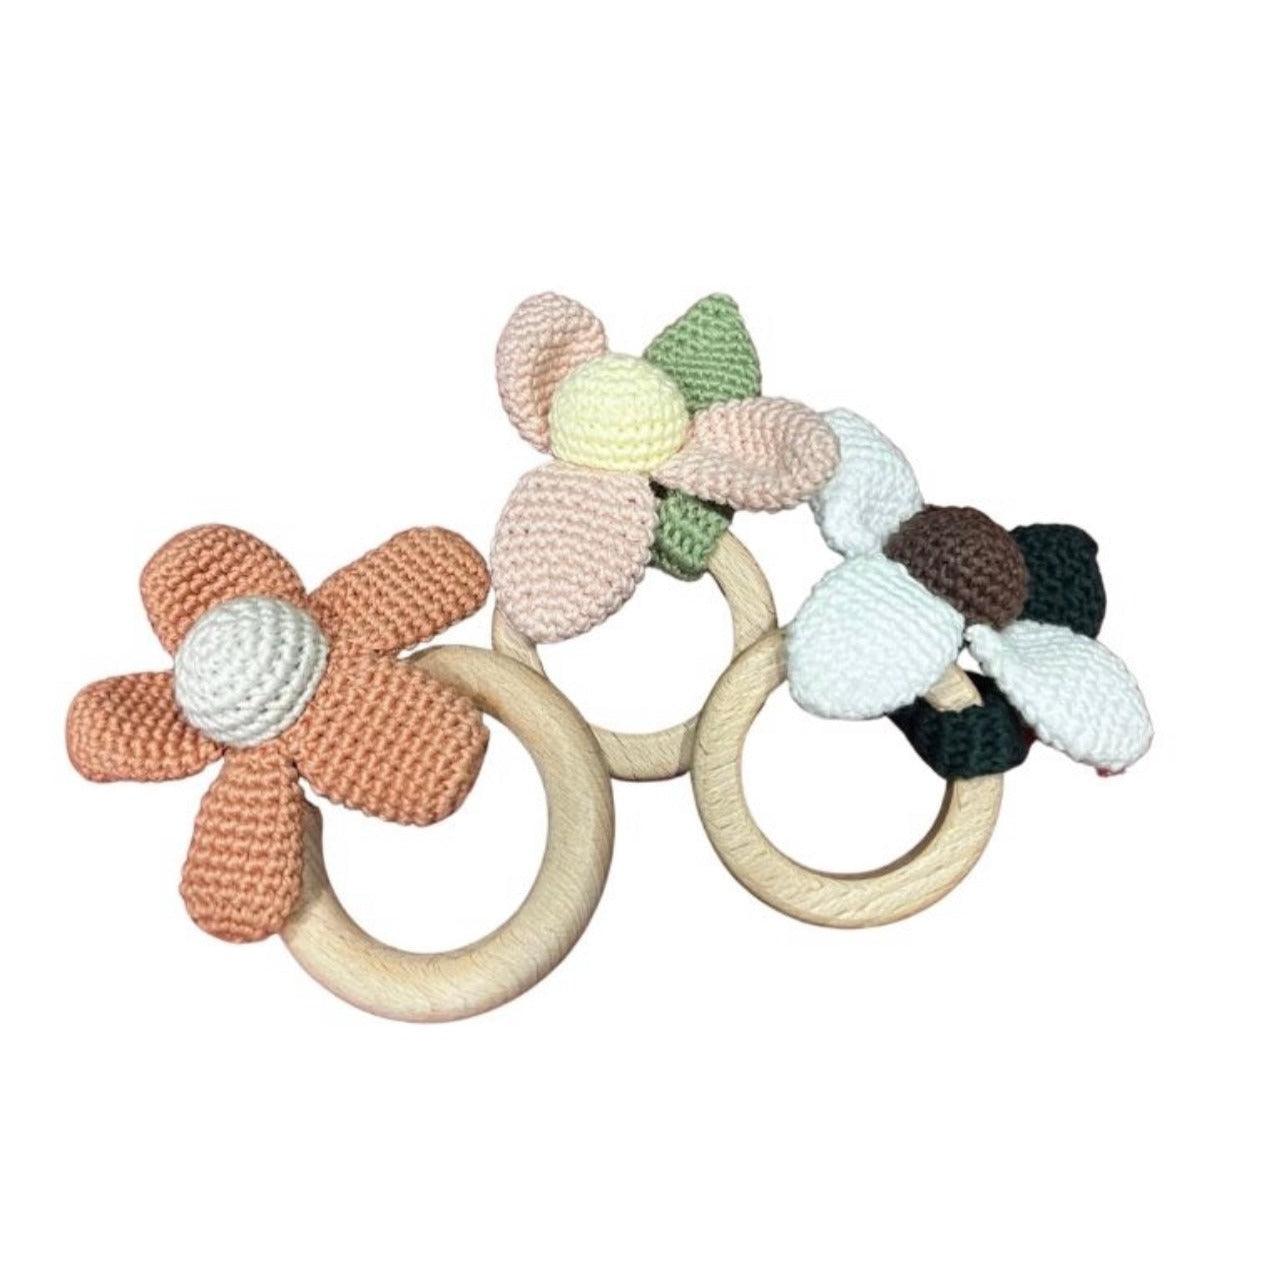 Handmade Knitted Crochet Wrist Teether - Expat Life Style